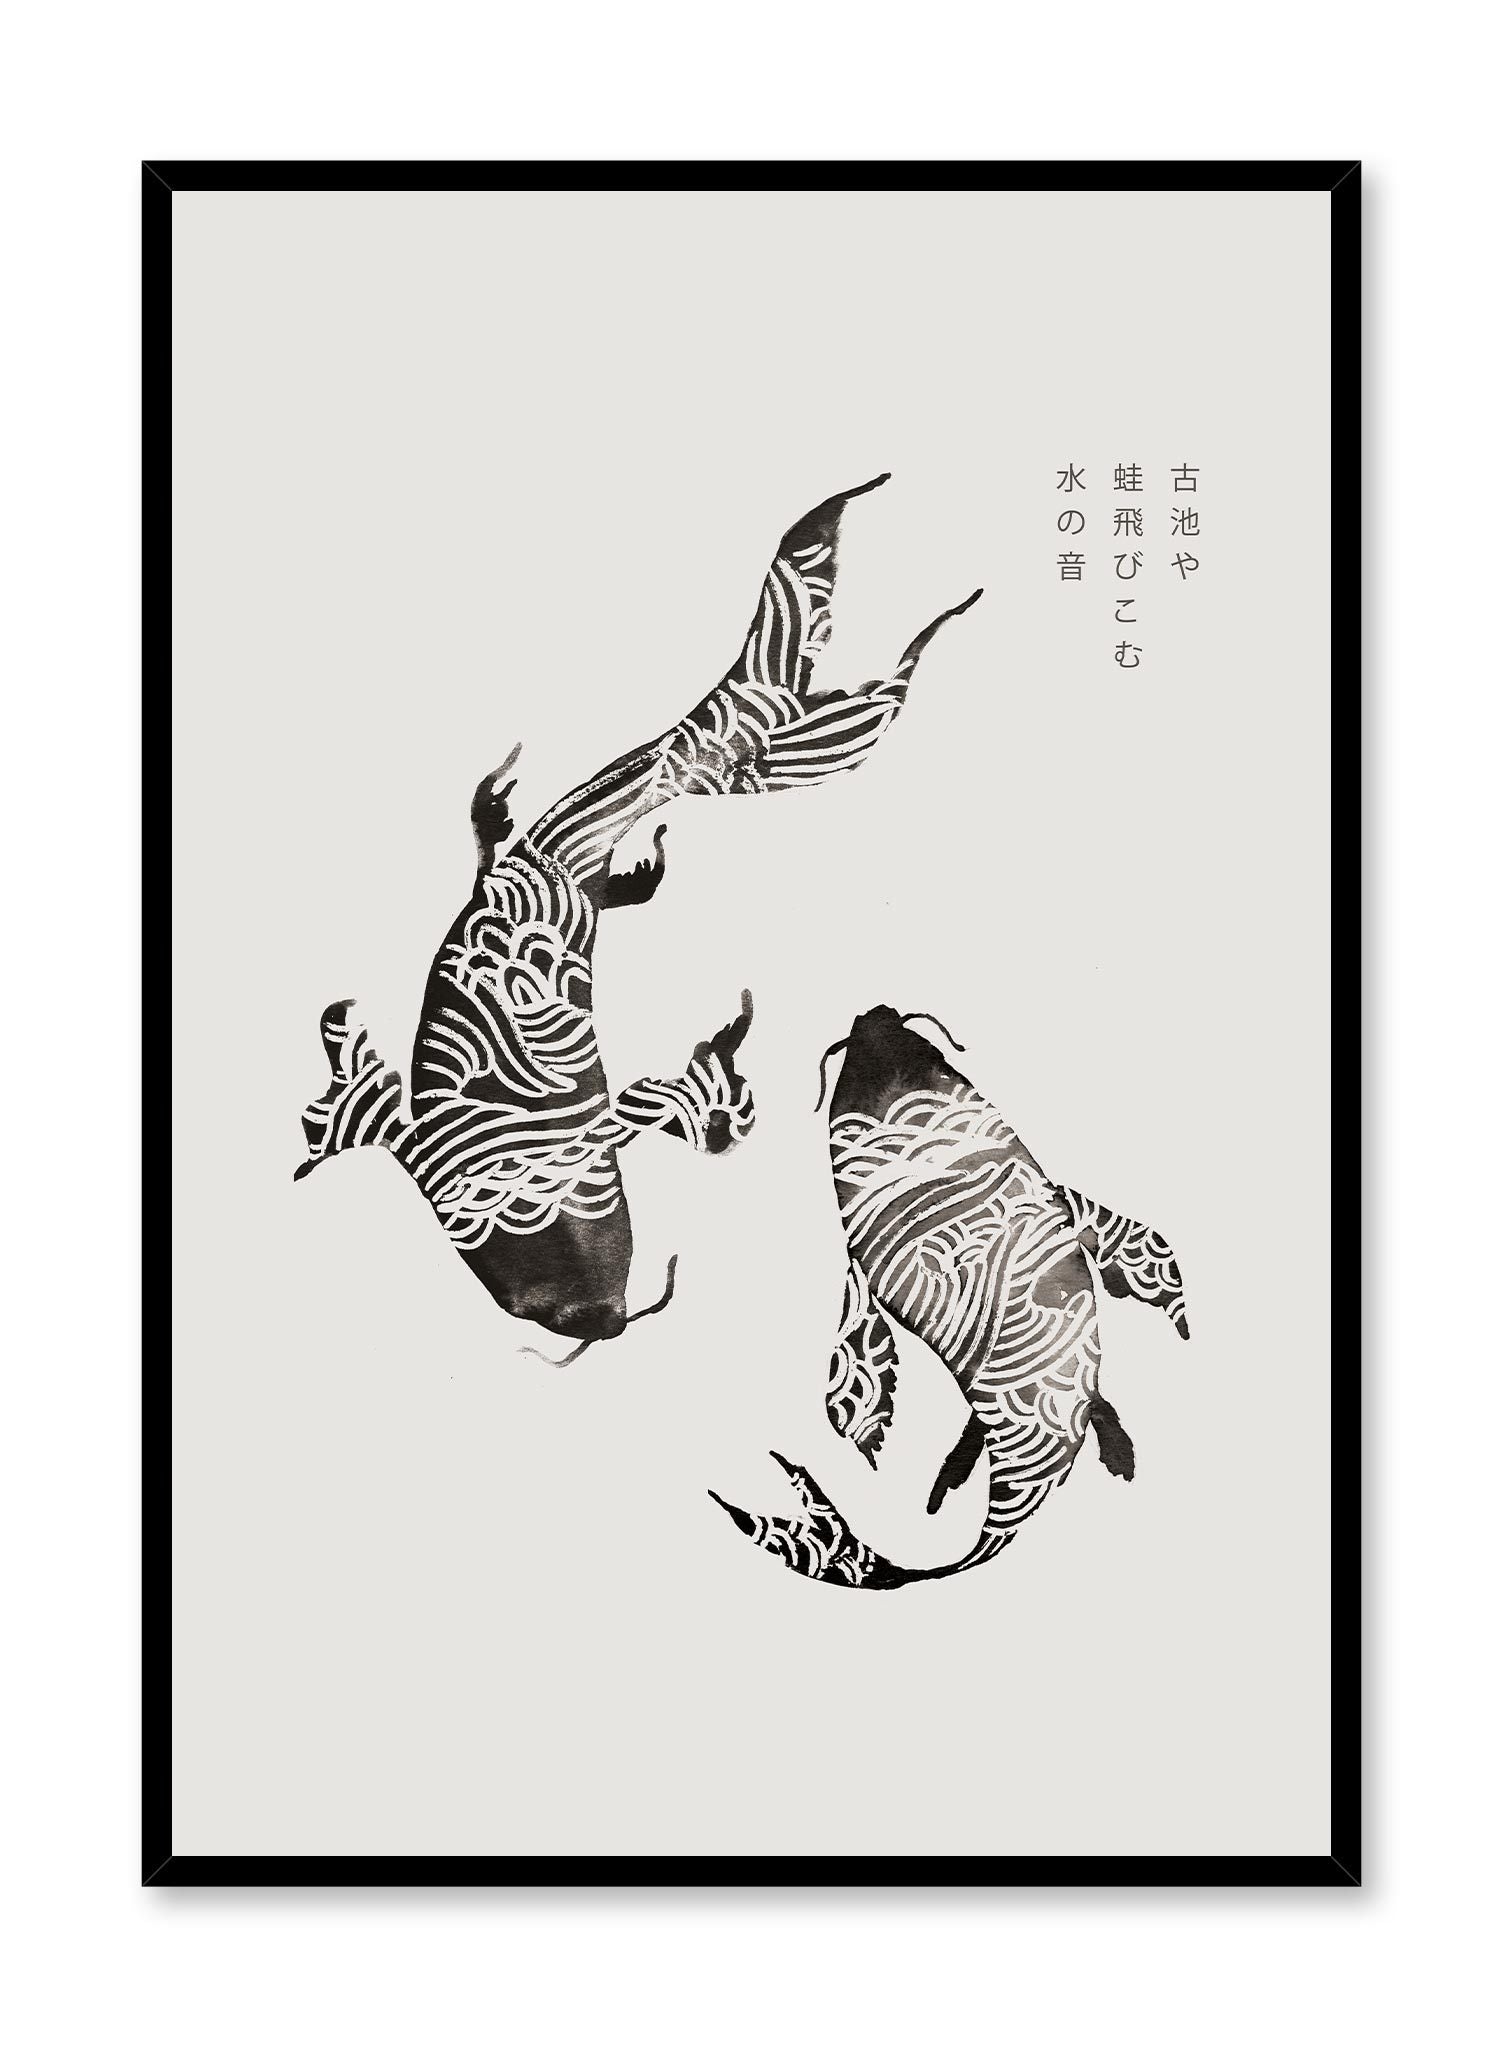 Koi and Haiku is a minimalist illustration by Opposite Wall of two striped koi fishes swimming towards each other.